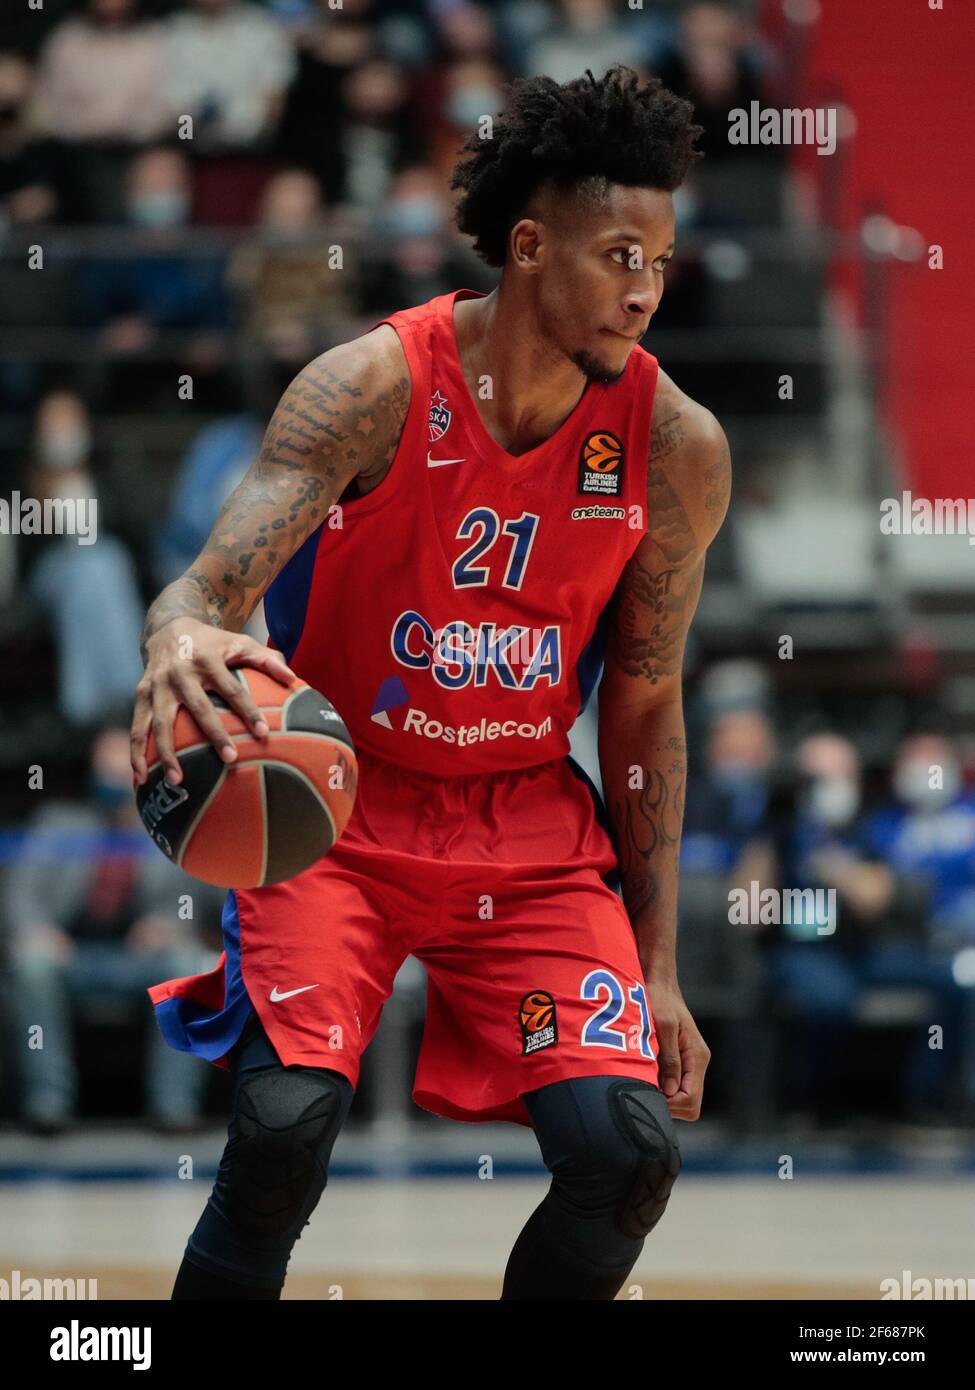 SAINT PETERSBURG, RUSSIA - MARCH 30: Will Clyburn of BC CSKA during the Euroleague  Basketball game between BC Zenit and BC CSKA at Sibur Arena on Marc Stock  Photo - Alamy